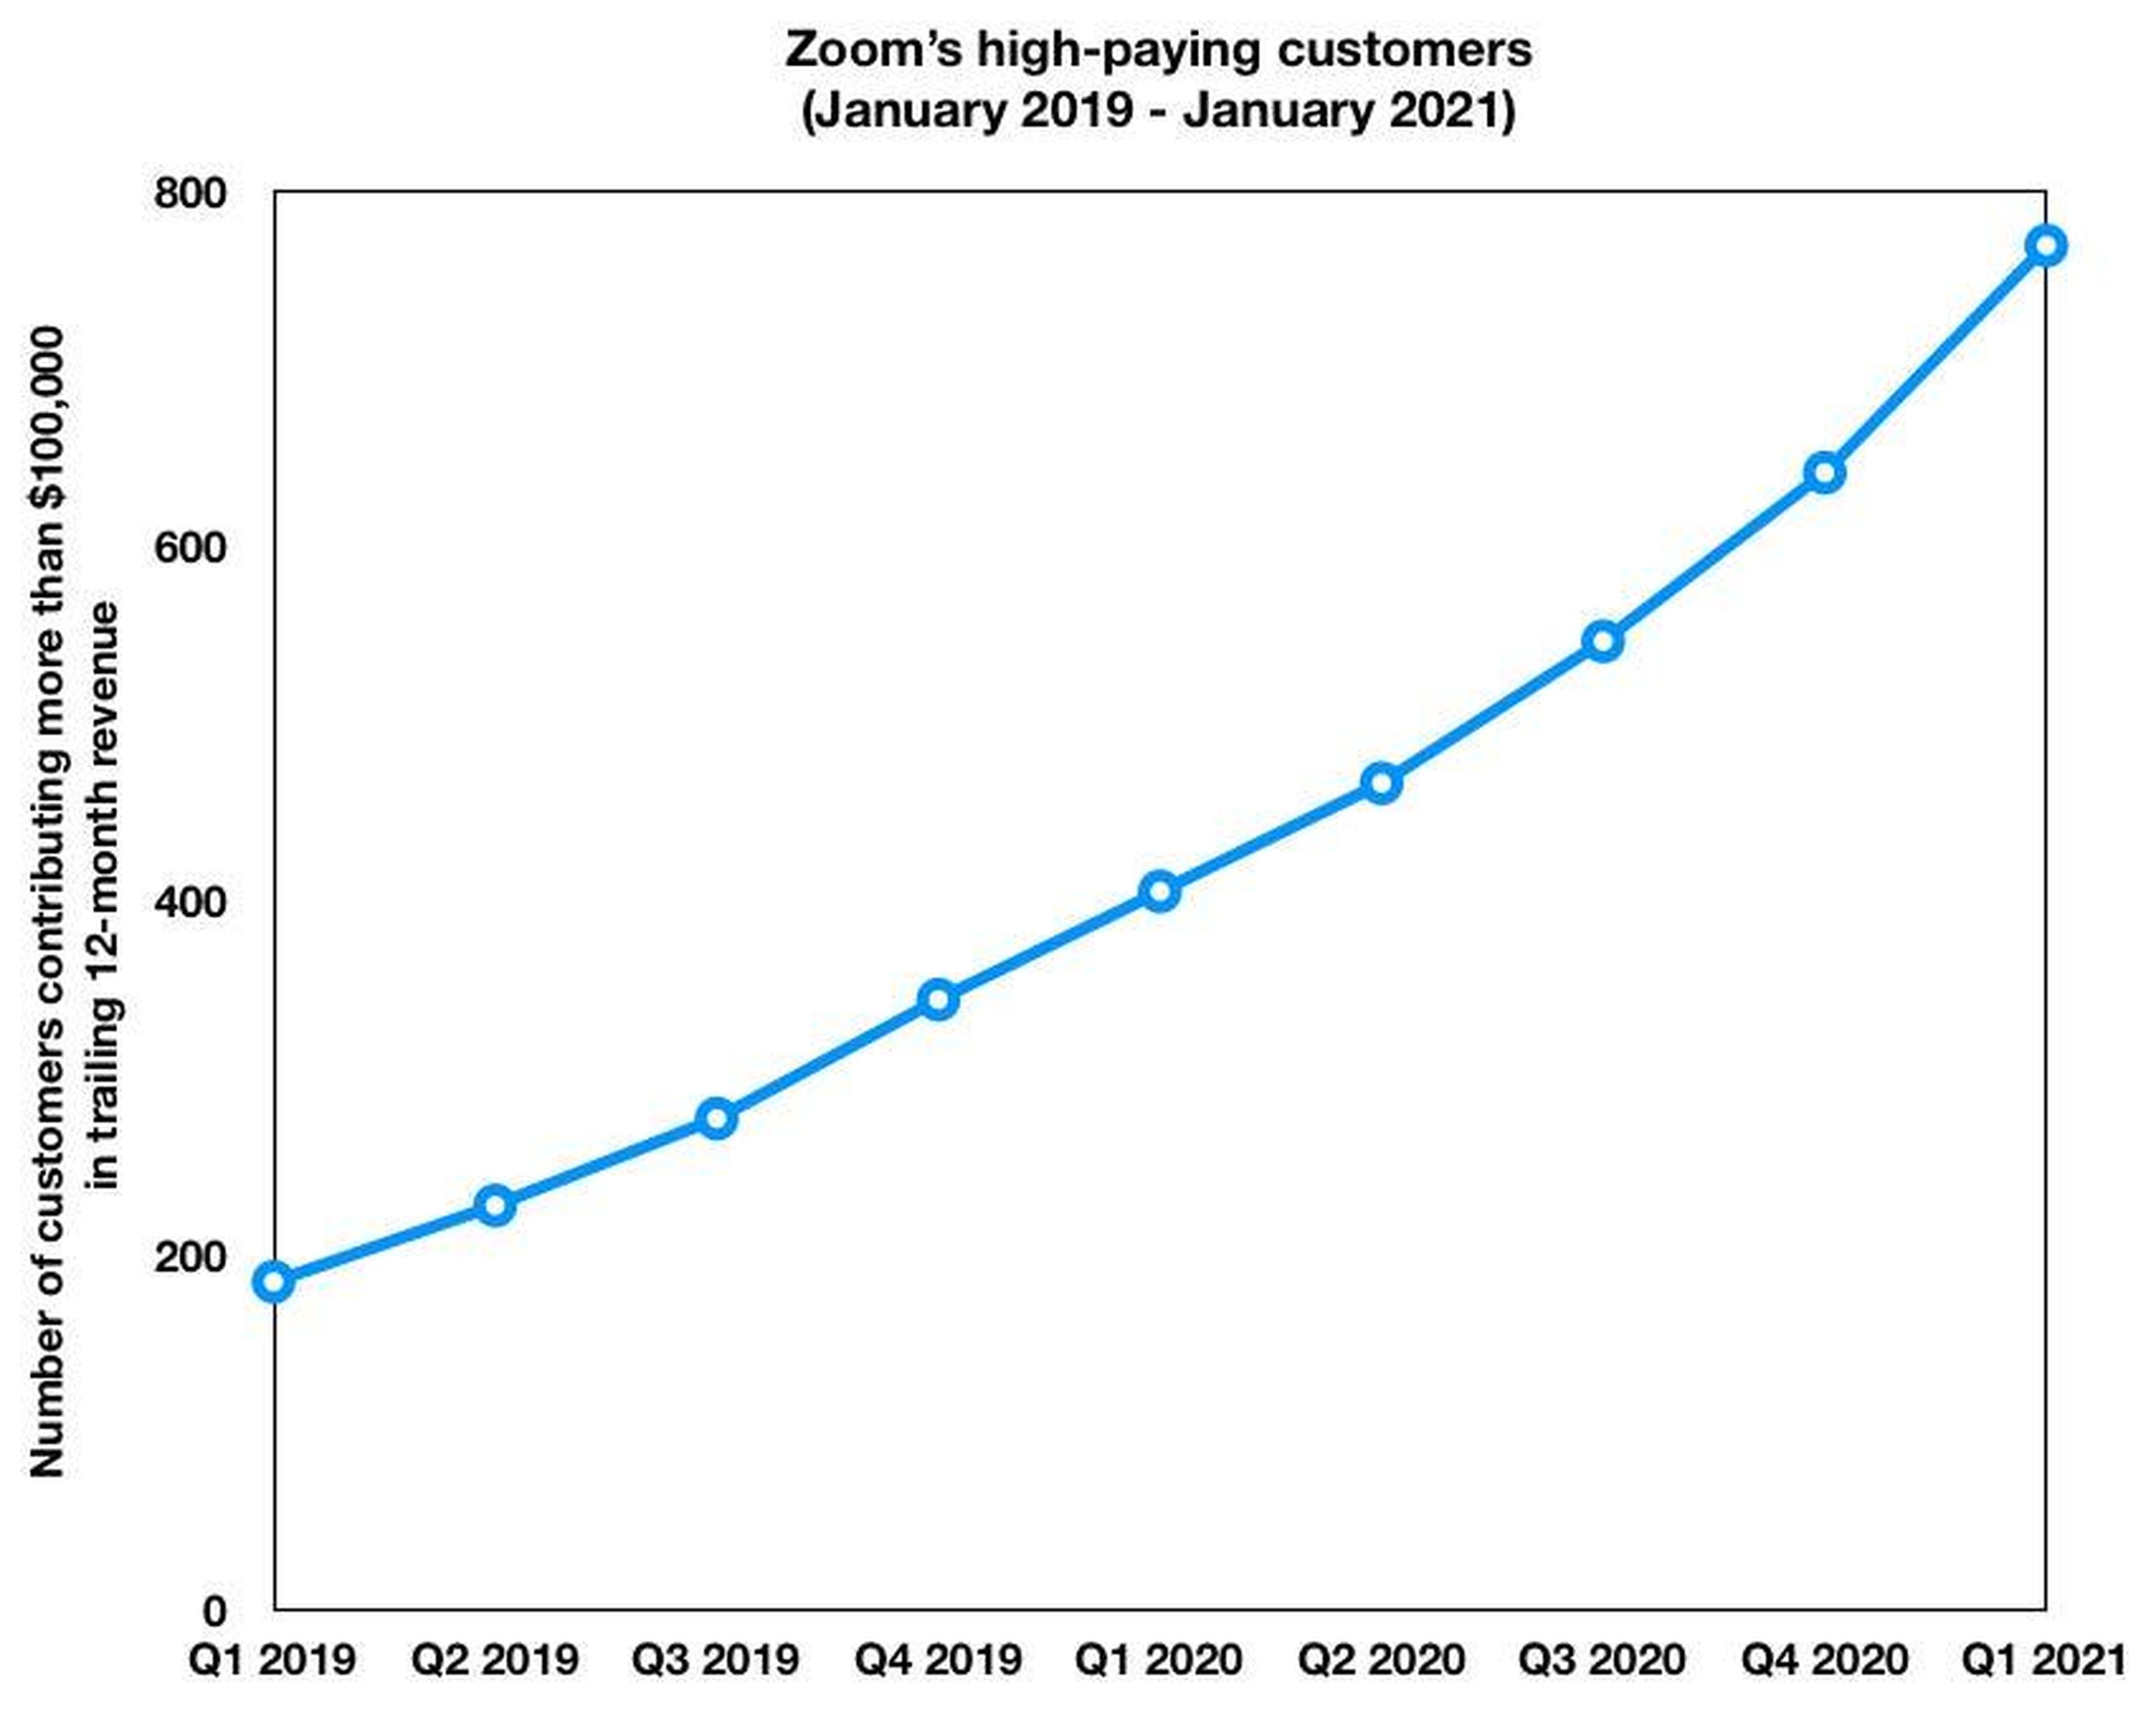 Zoom added nearly 130 high-paying customers last quarter